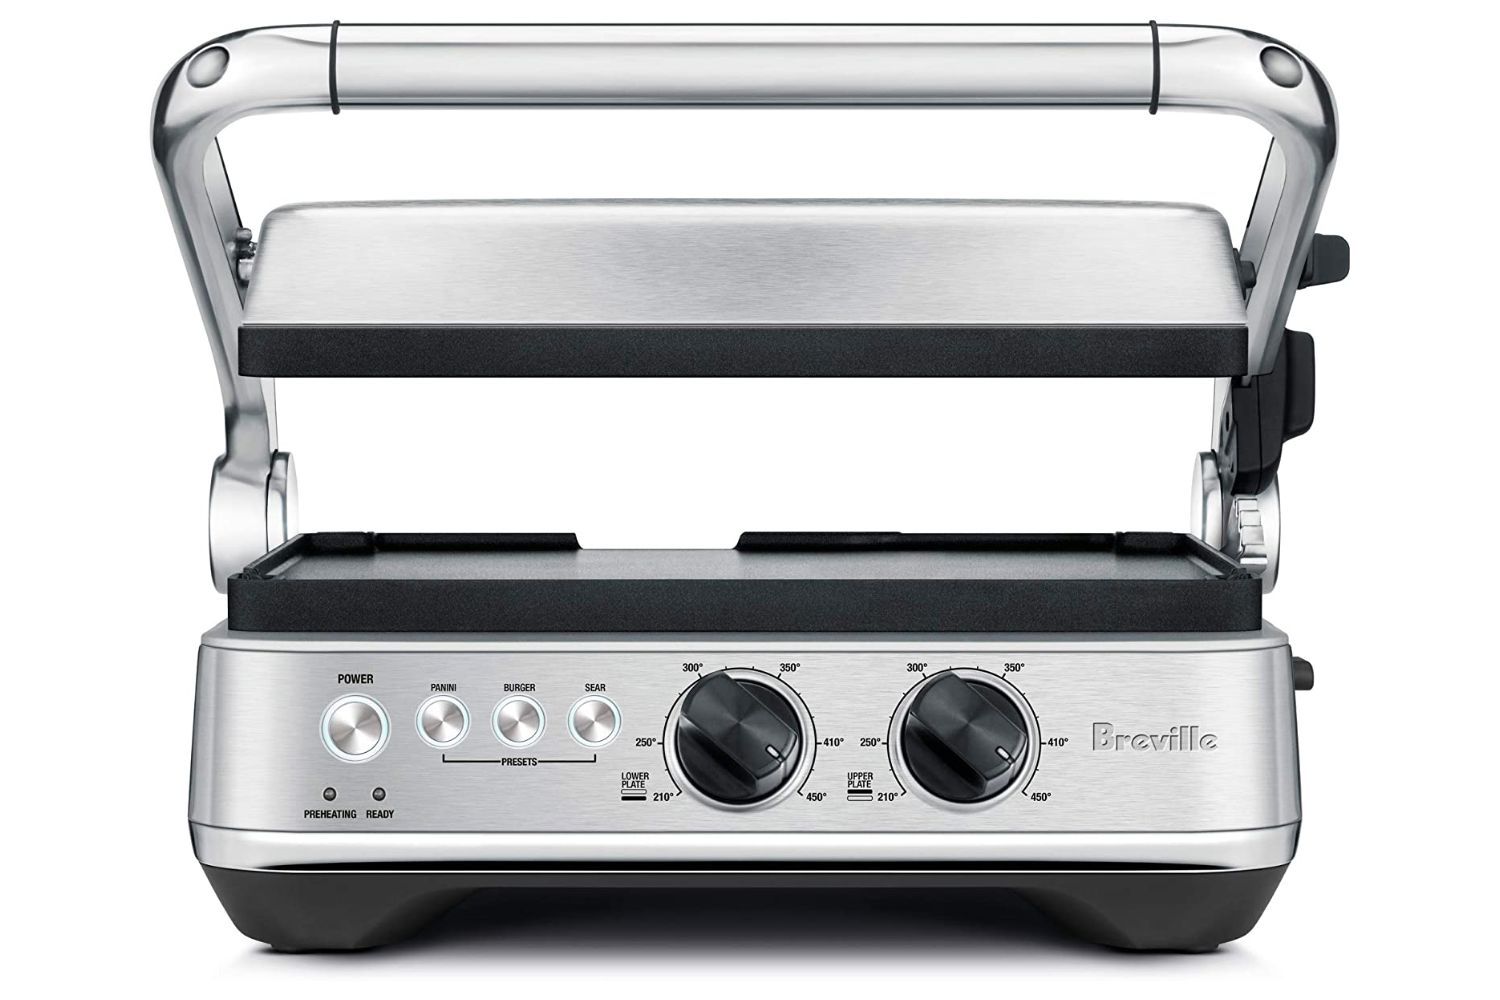 Breville BGR700BSS The Sear and Press Countertop Electric Grill